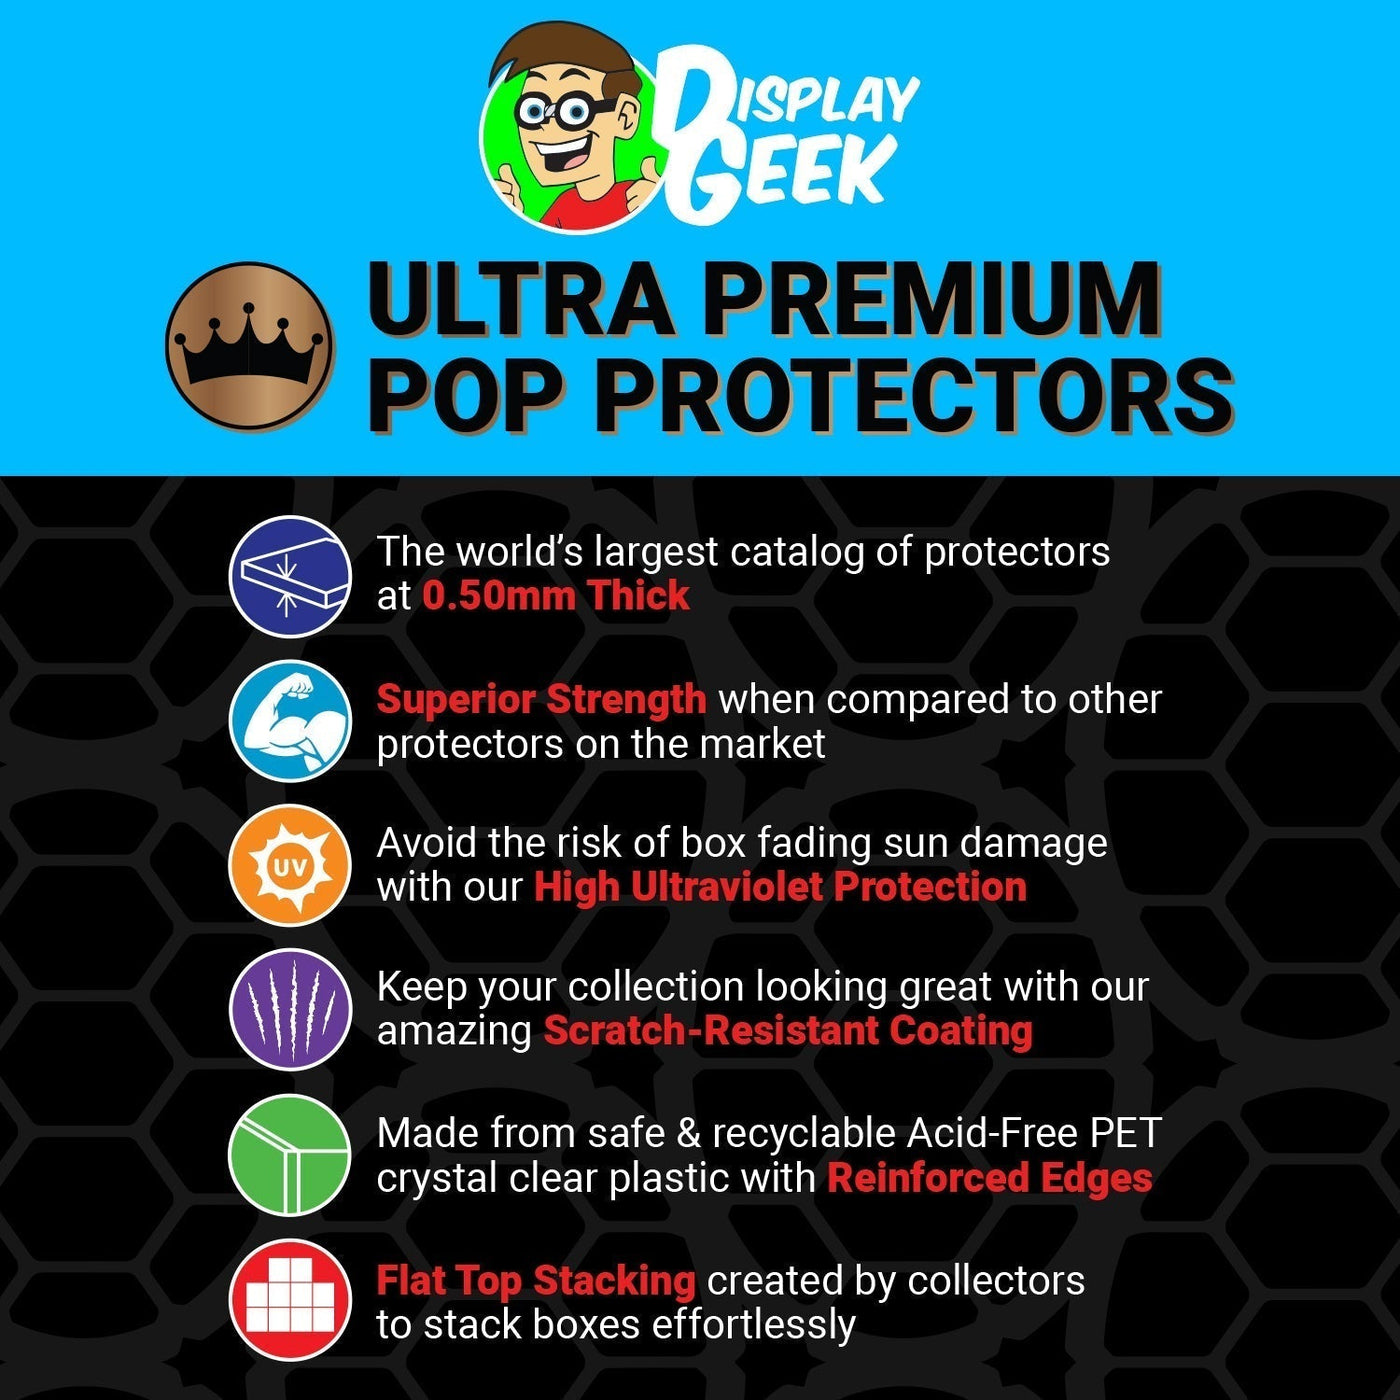 Pop Protector for 6 inch Red Panda Mei Flocked #1185 Super Funko Pop on The Protector Guide App by Display Geek